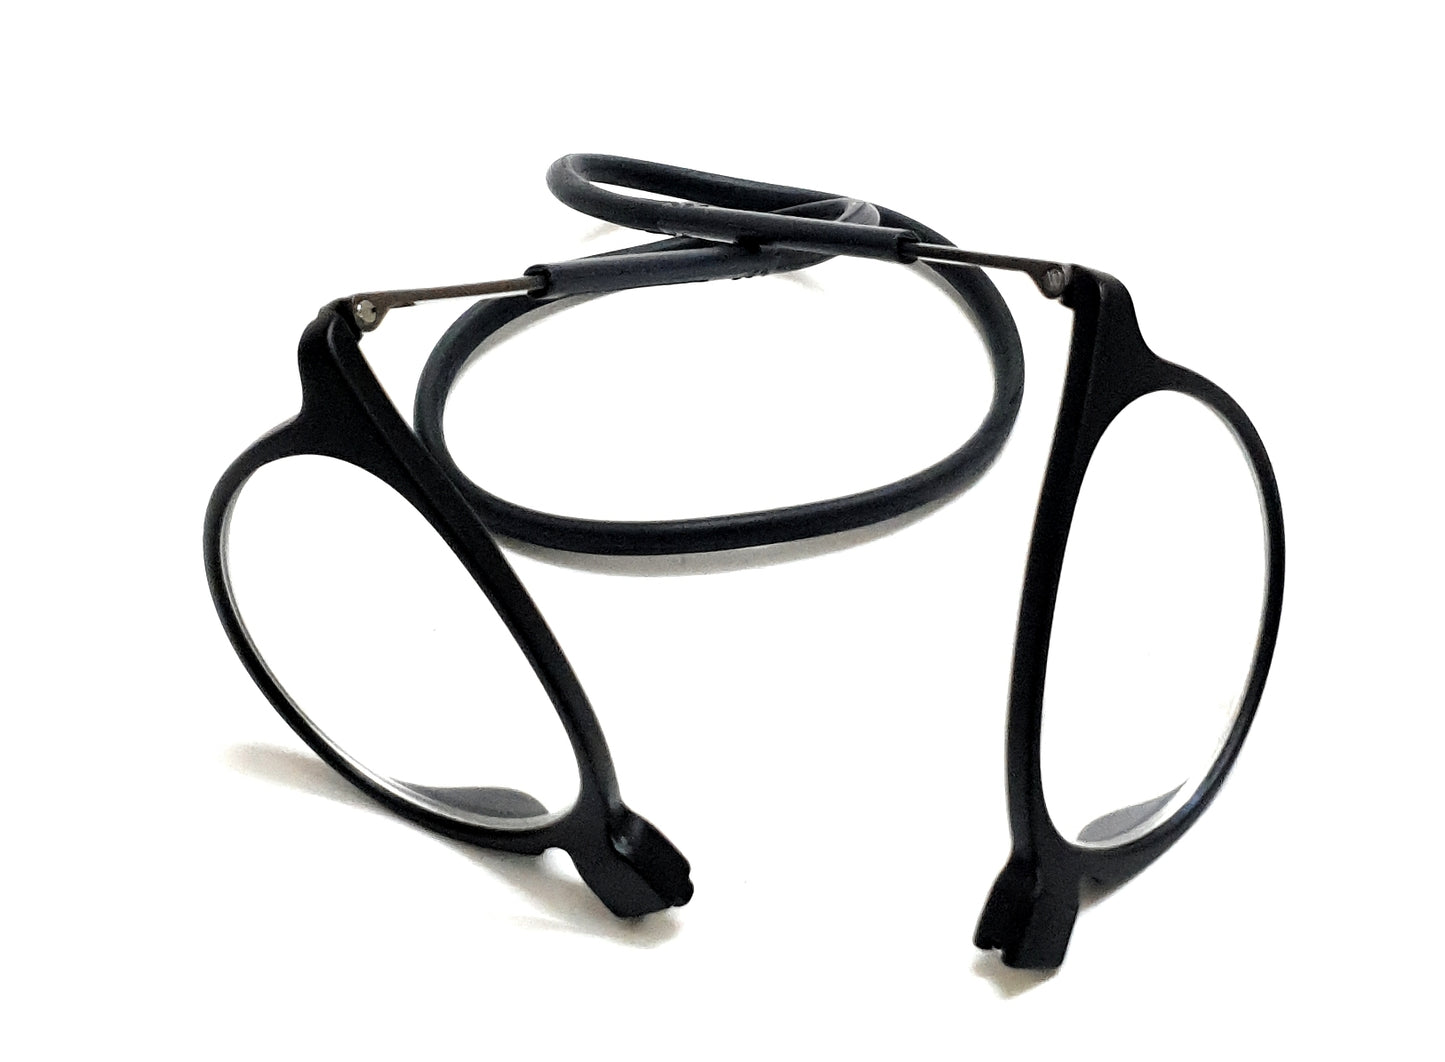 Round Magnetic Easyflex Reading Spectacle Glasses Suitable For Near Vision Color Black